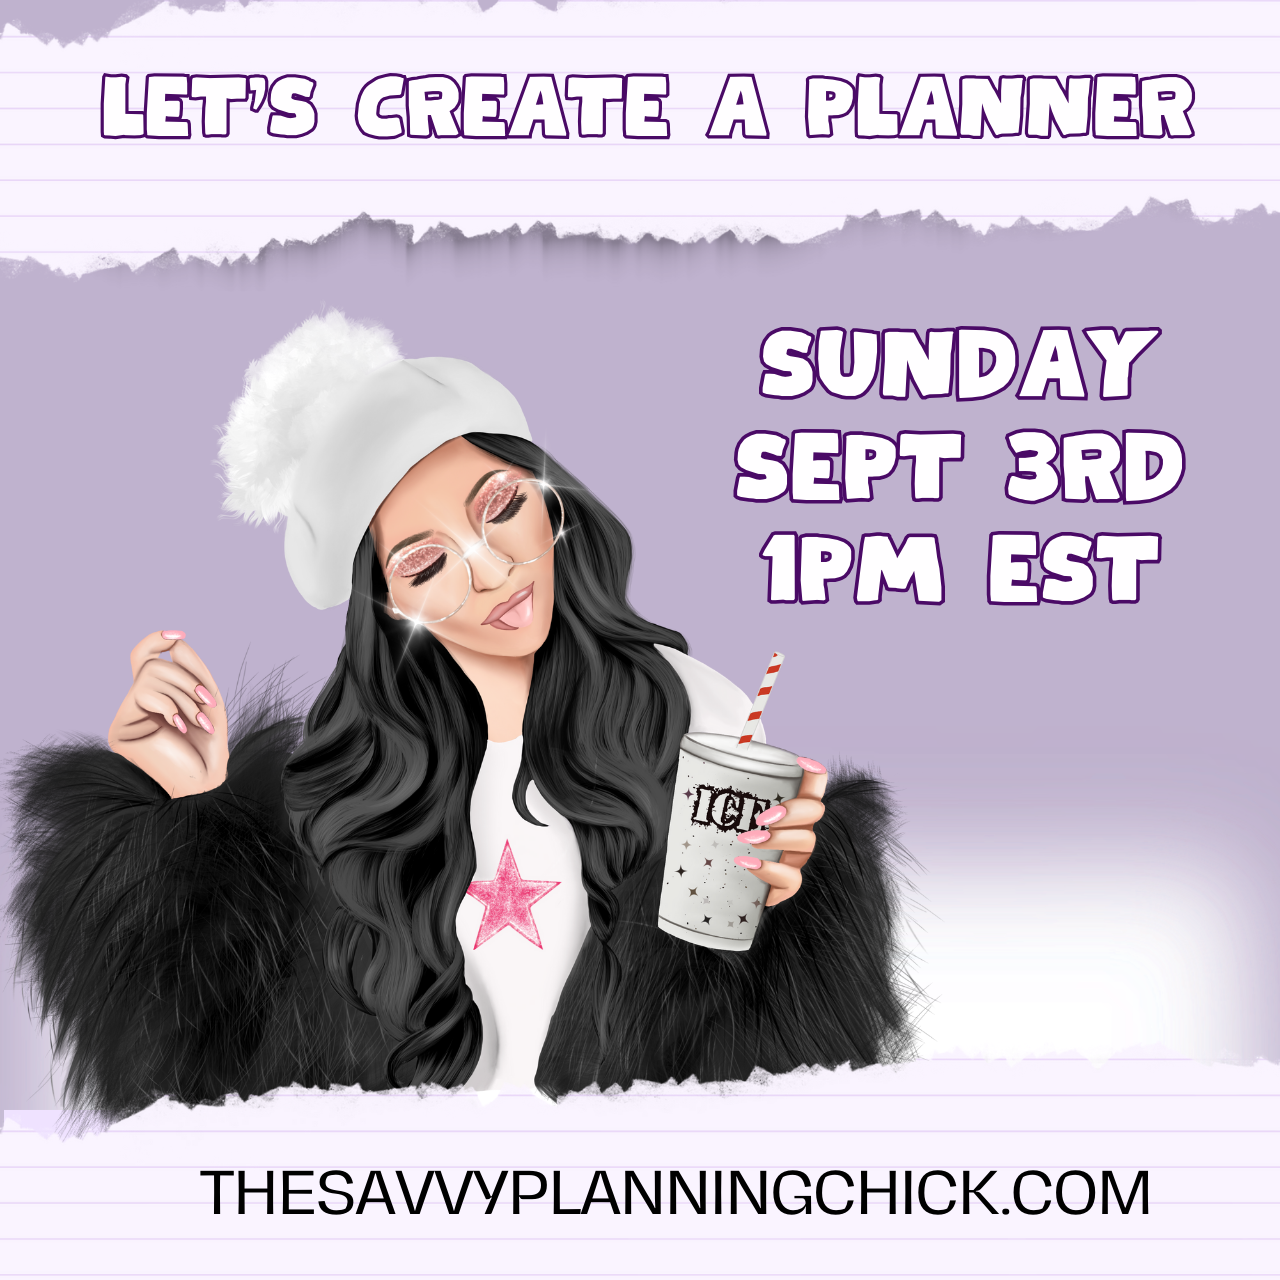 LET'S CREATE A PLANNER